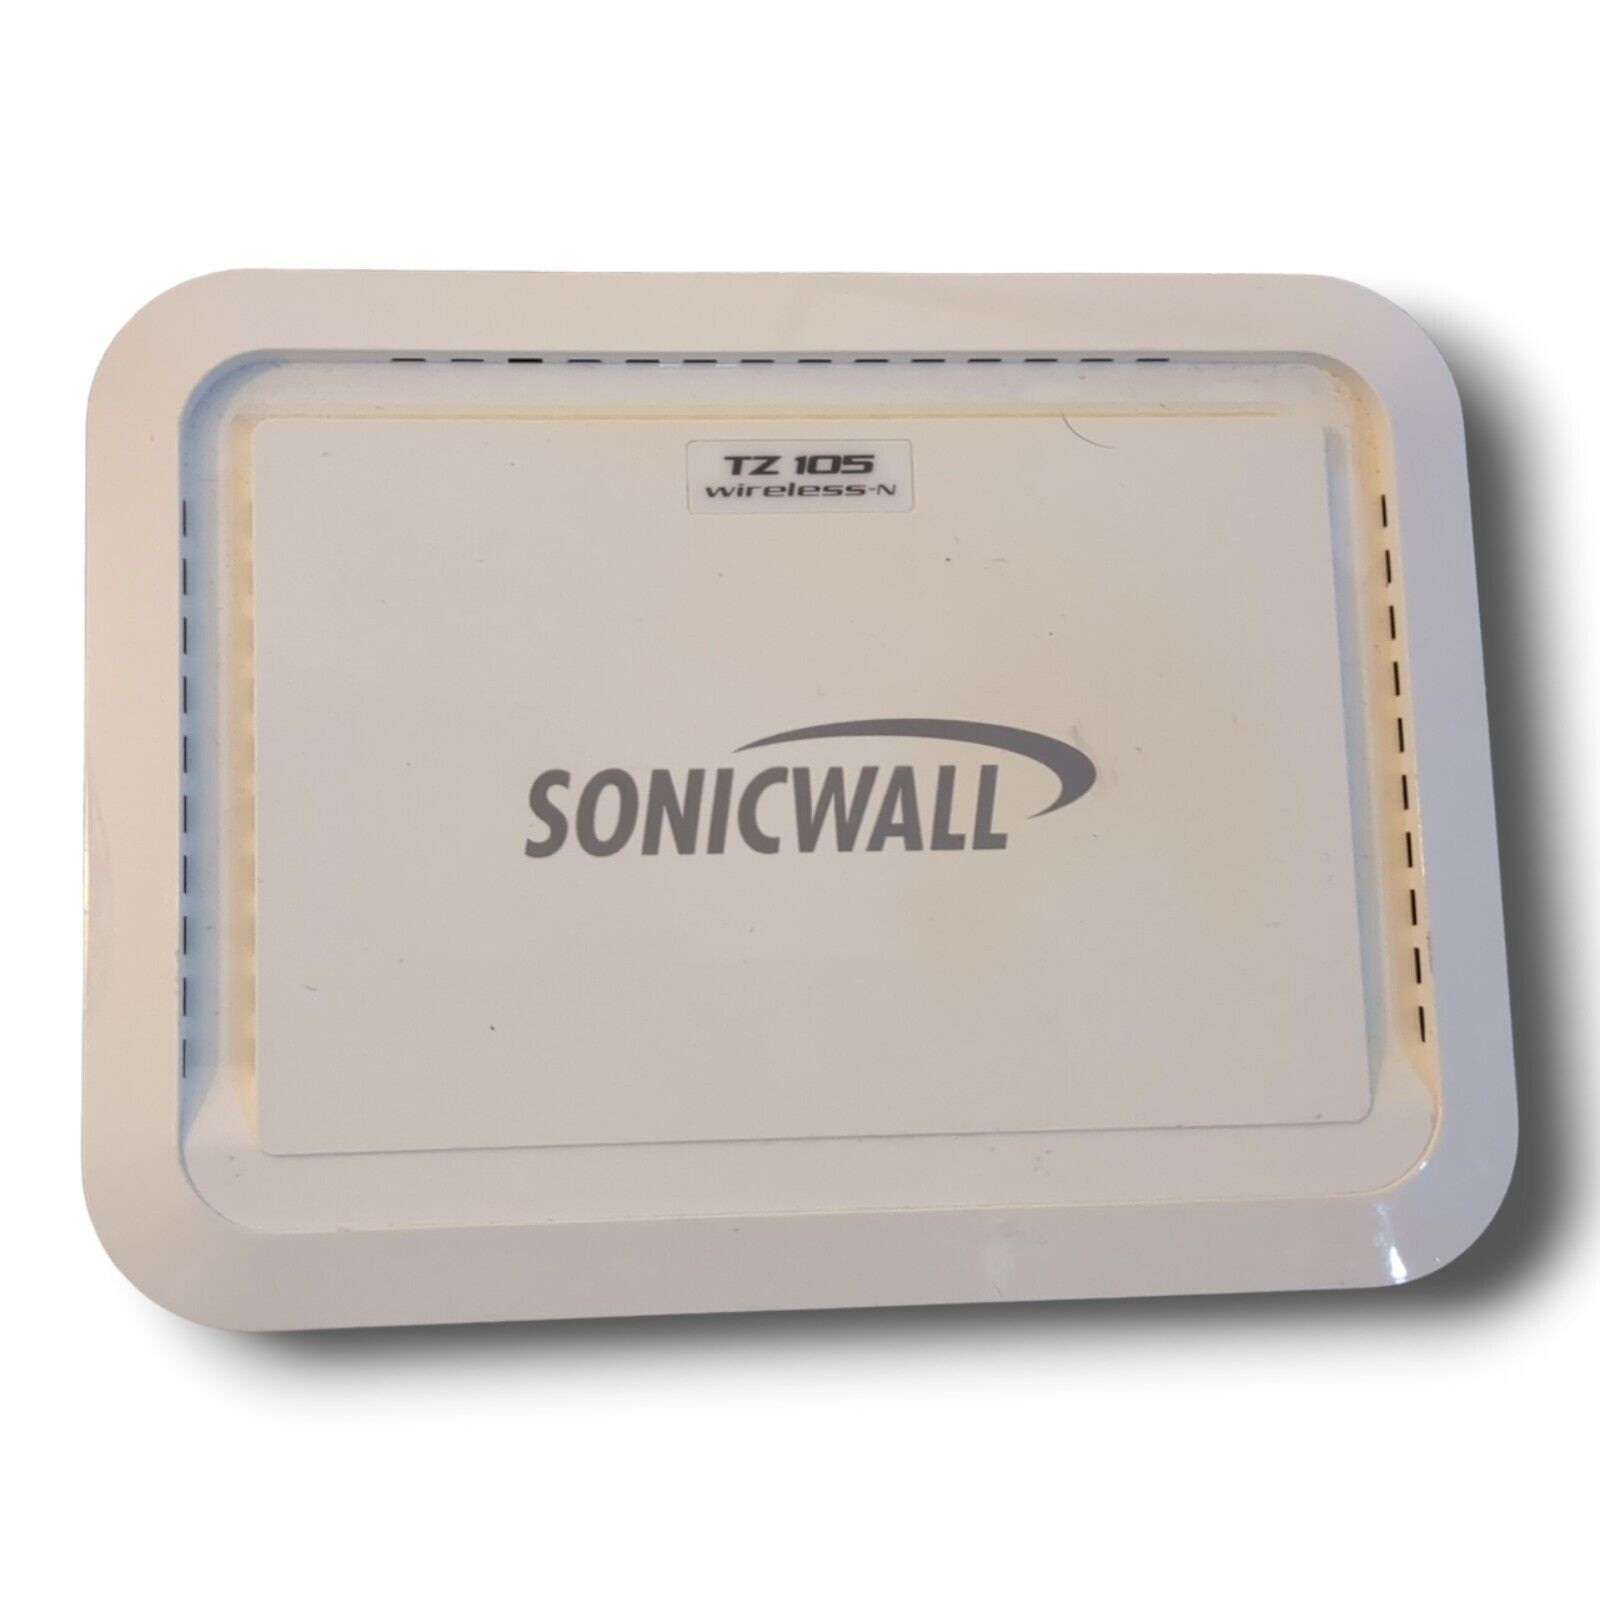 SonicWALL TZ105W Network Security Appliance USED